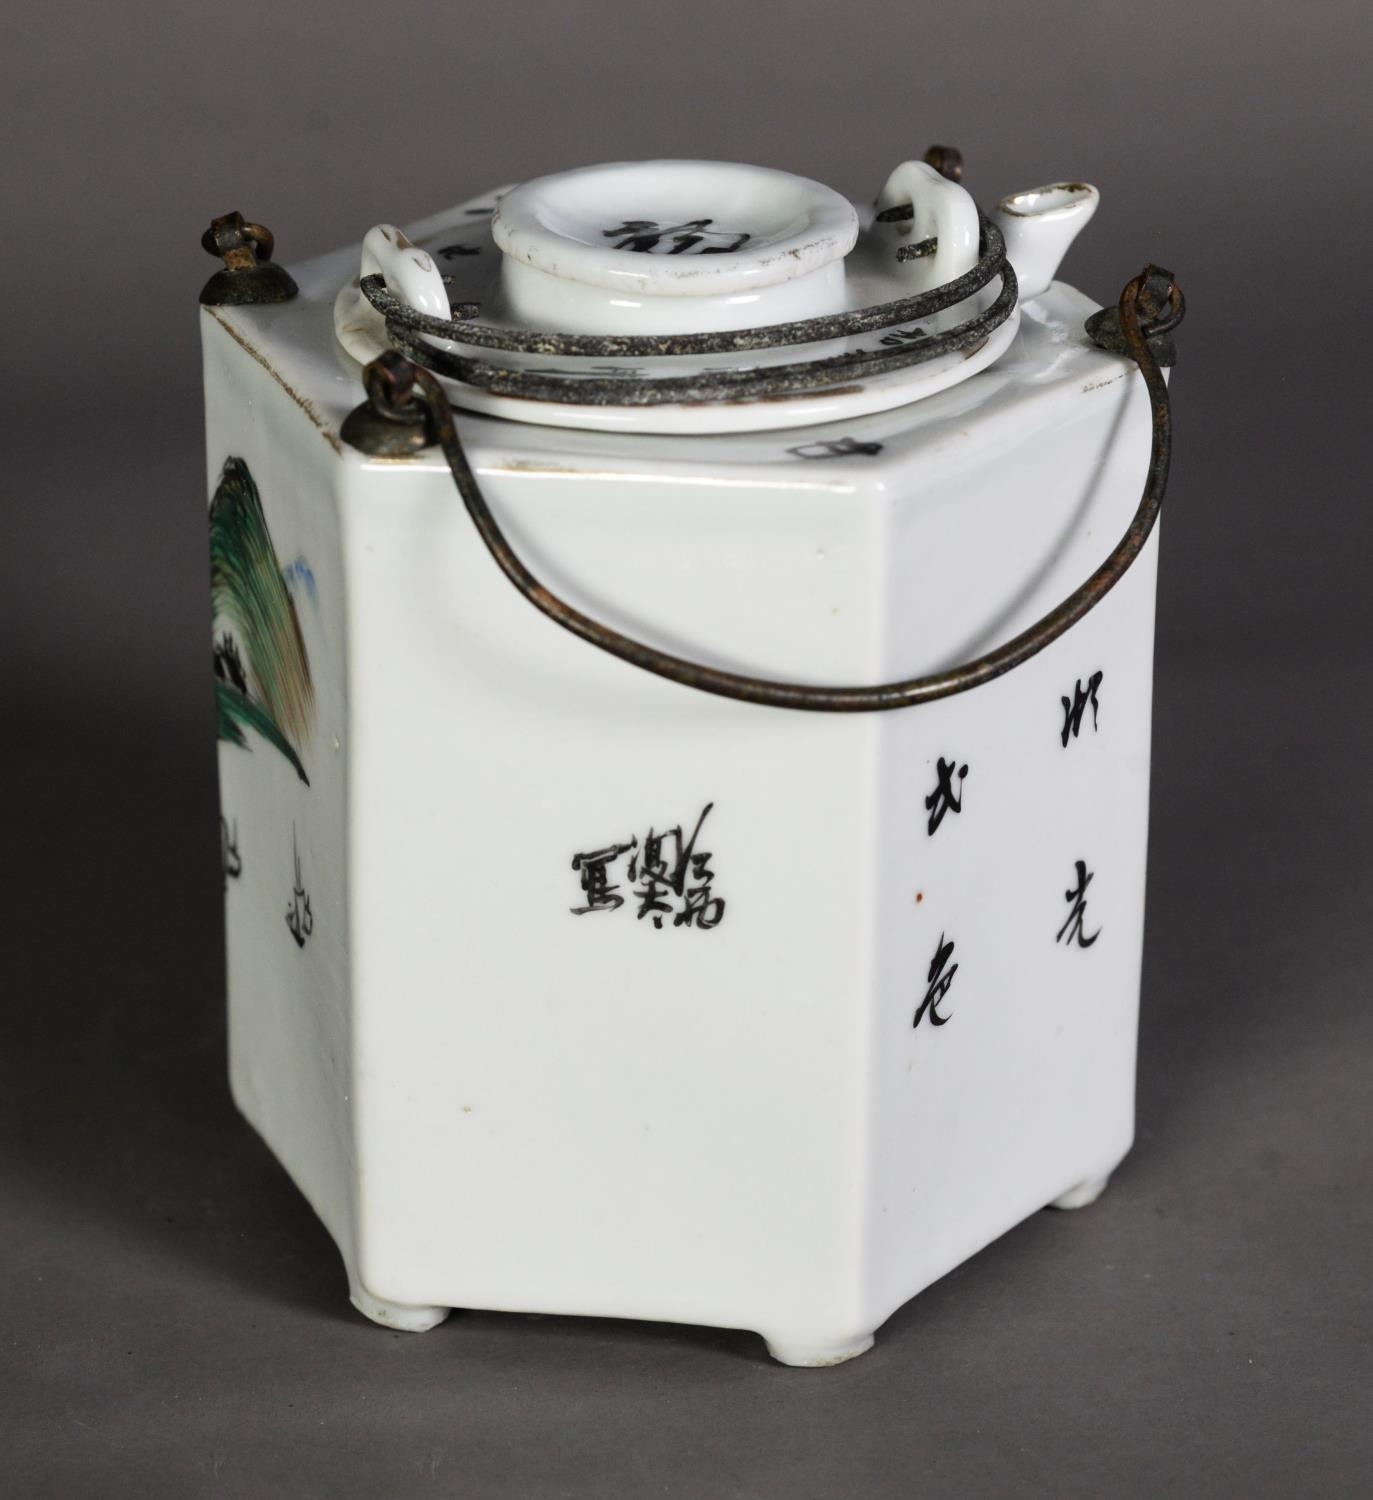 20th CENTURY CHINESE PORCELAIN SMALL CYLINDRICAL TEAPOT standing in a hexagonal hot water reservoir, - Image 4 of 4